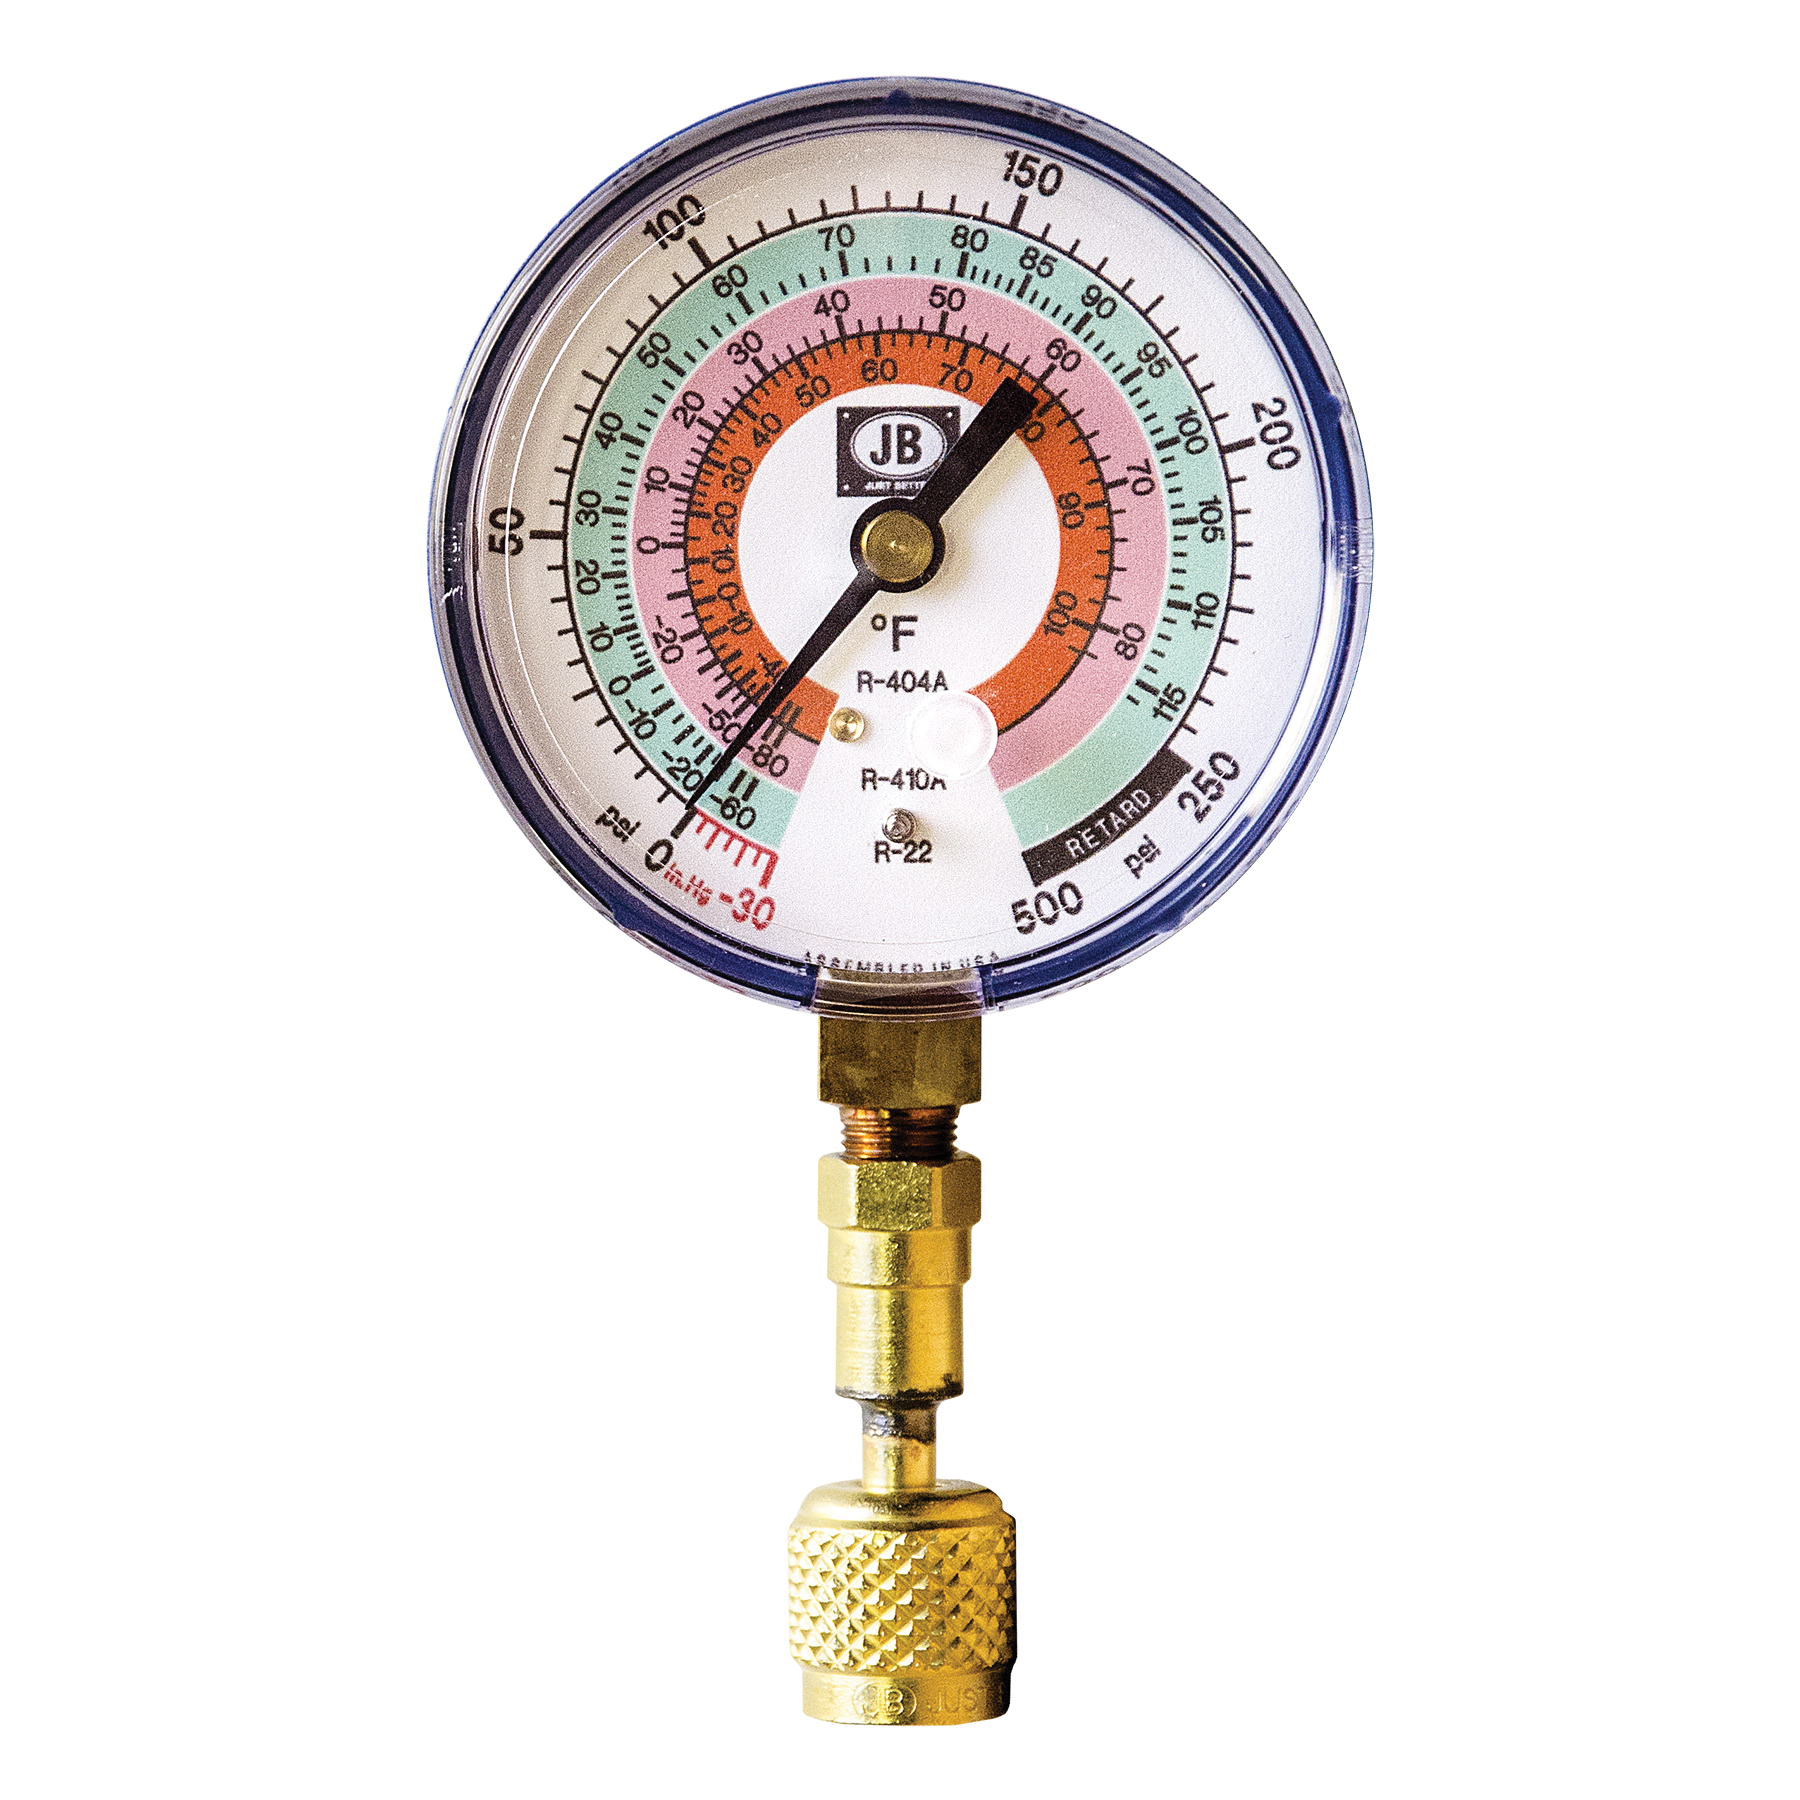 JB Industries QC-G820 Compound Single Test Gauge, +/-1 % Accuracy, 1/4 in Connection, 500 psi Pressure